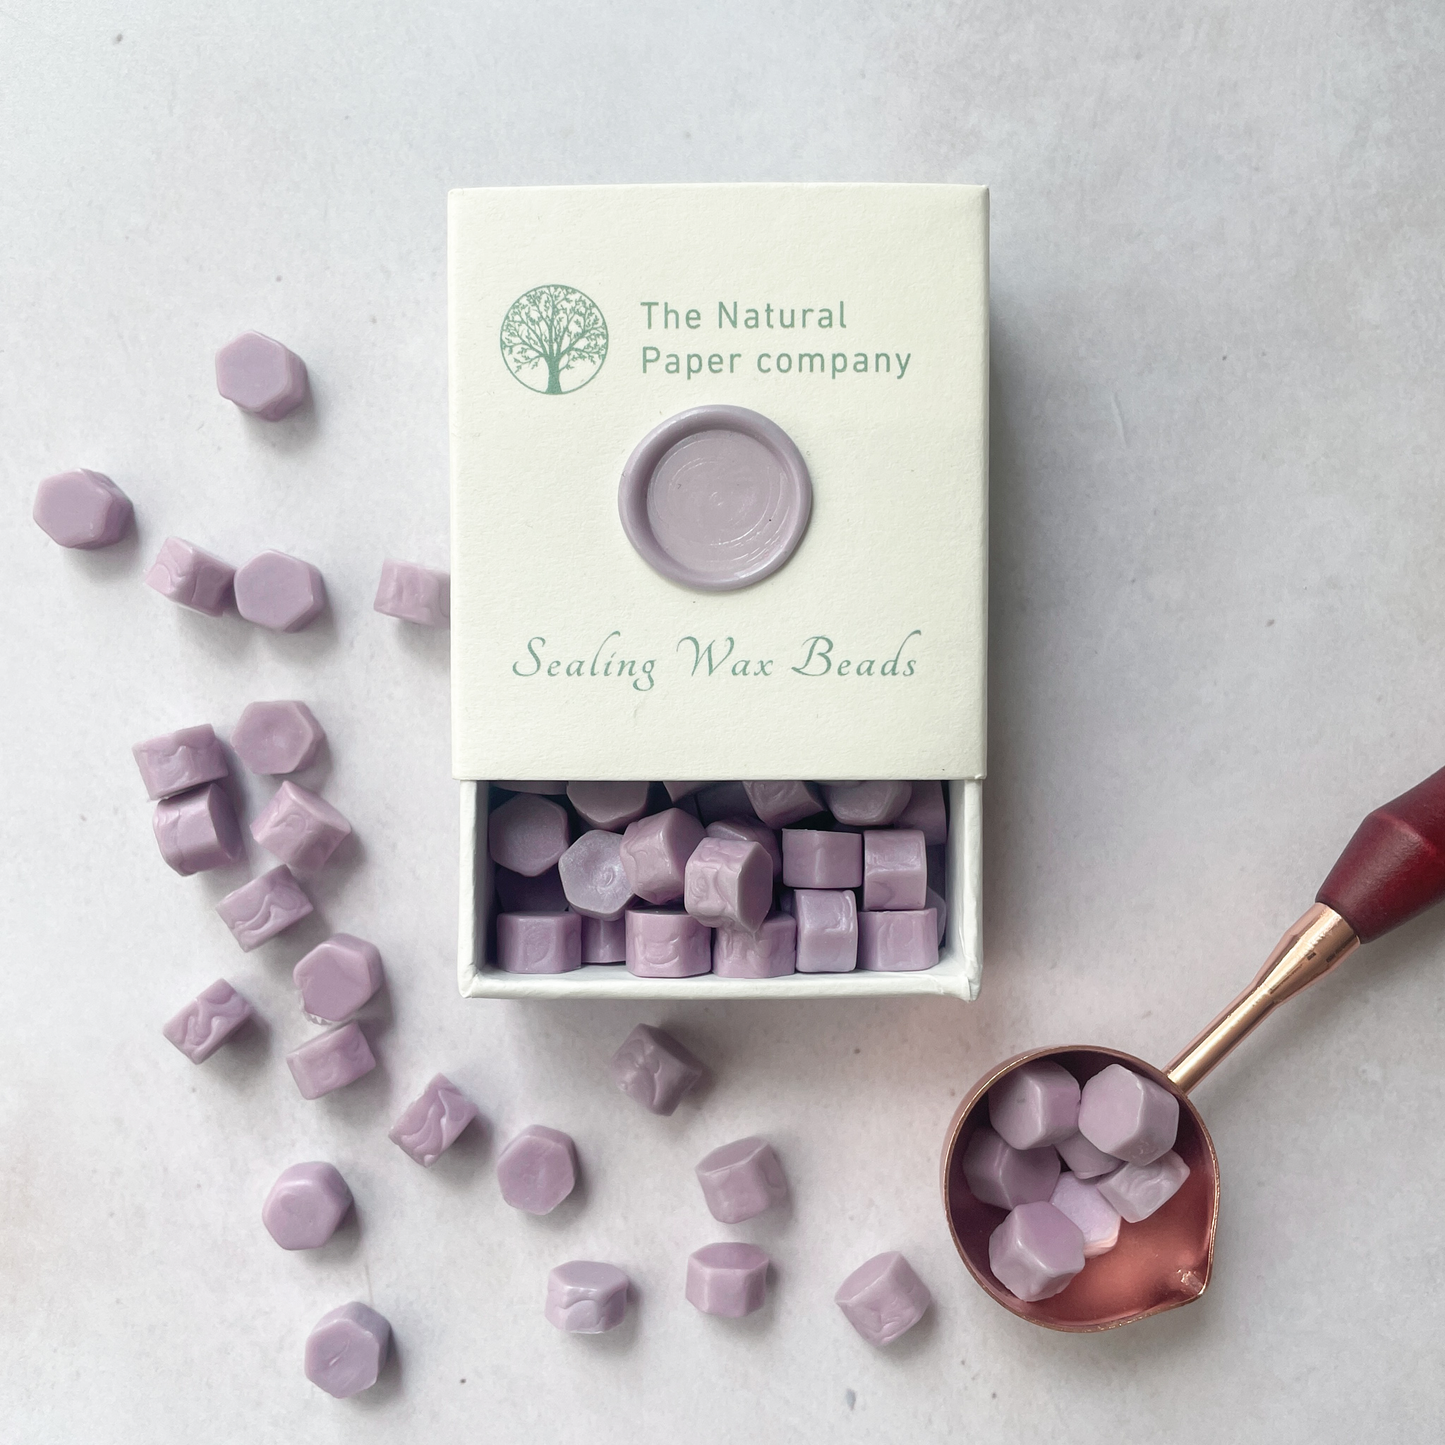 pale lilac sealing wax beads in a box.  Eco friendly wax for making wax stamps and seals.  